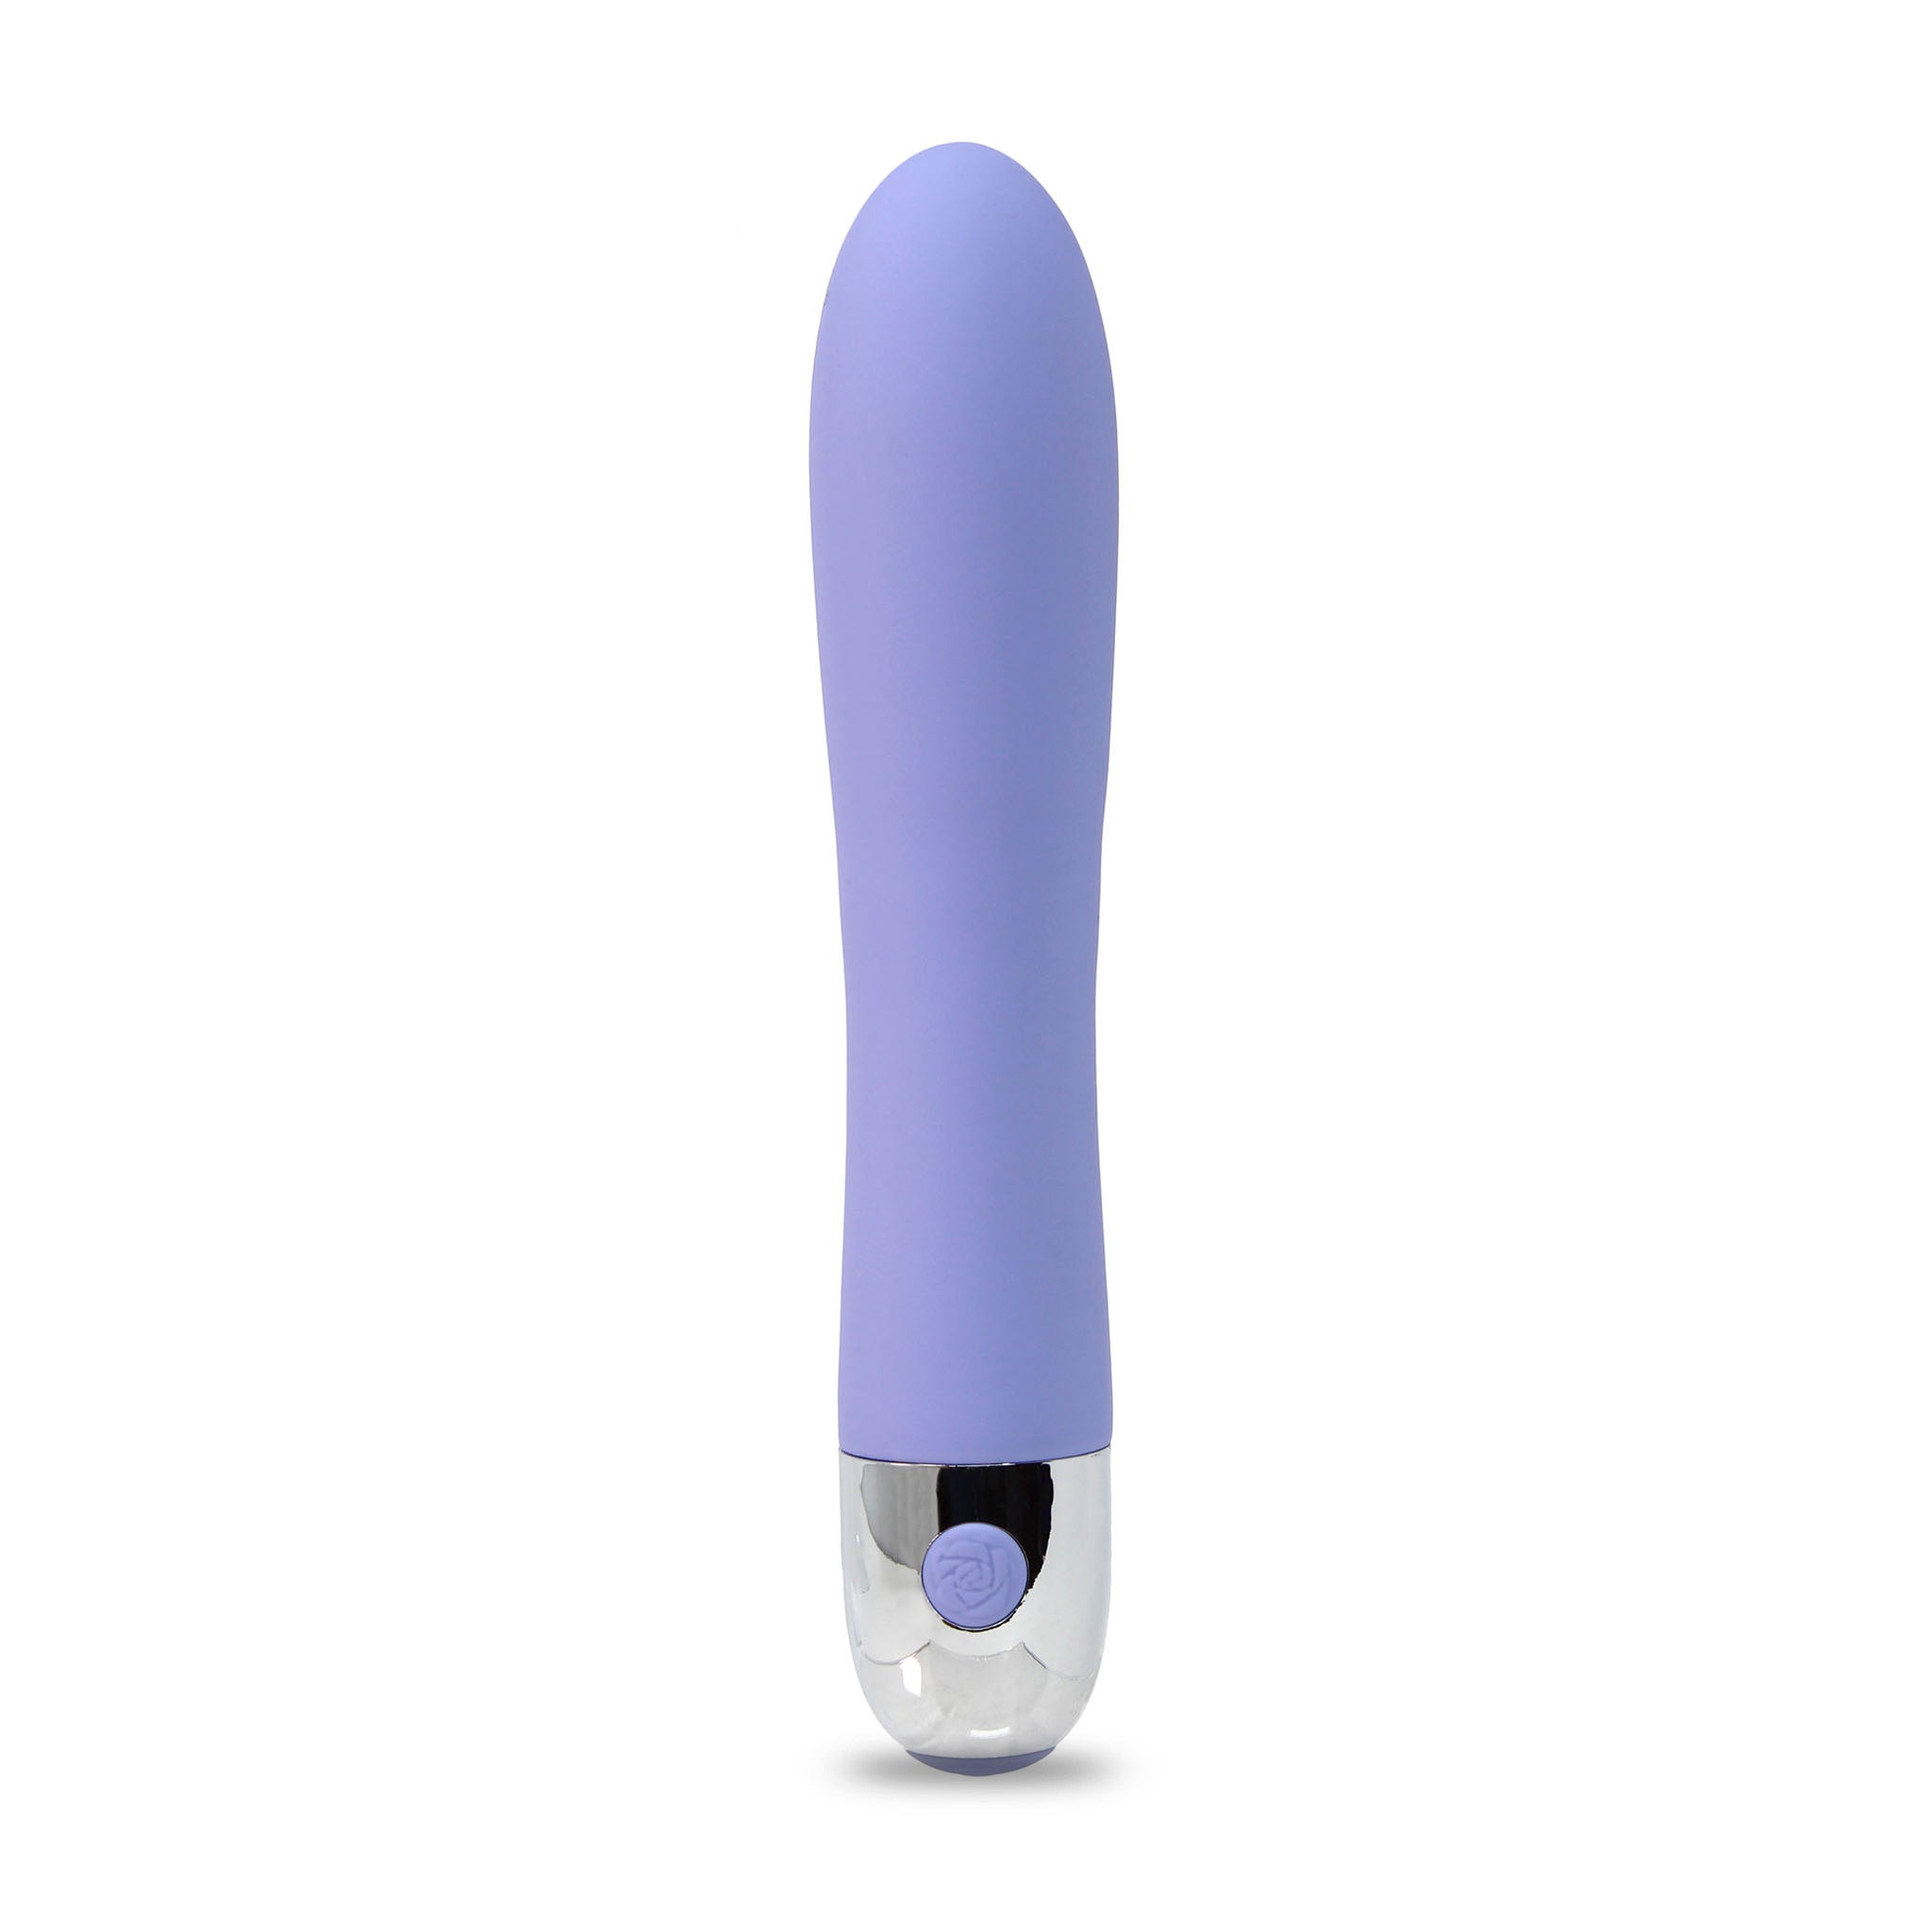 Rechargeable Silicone G-spot Anal Vibrator Massager Beginner Sex Toys for Women